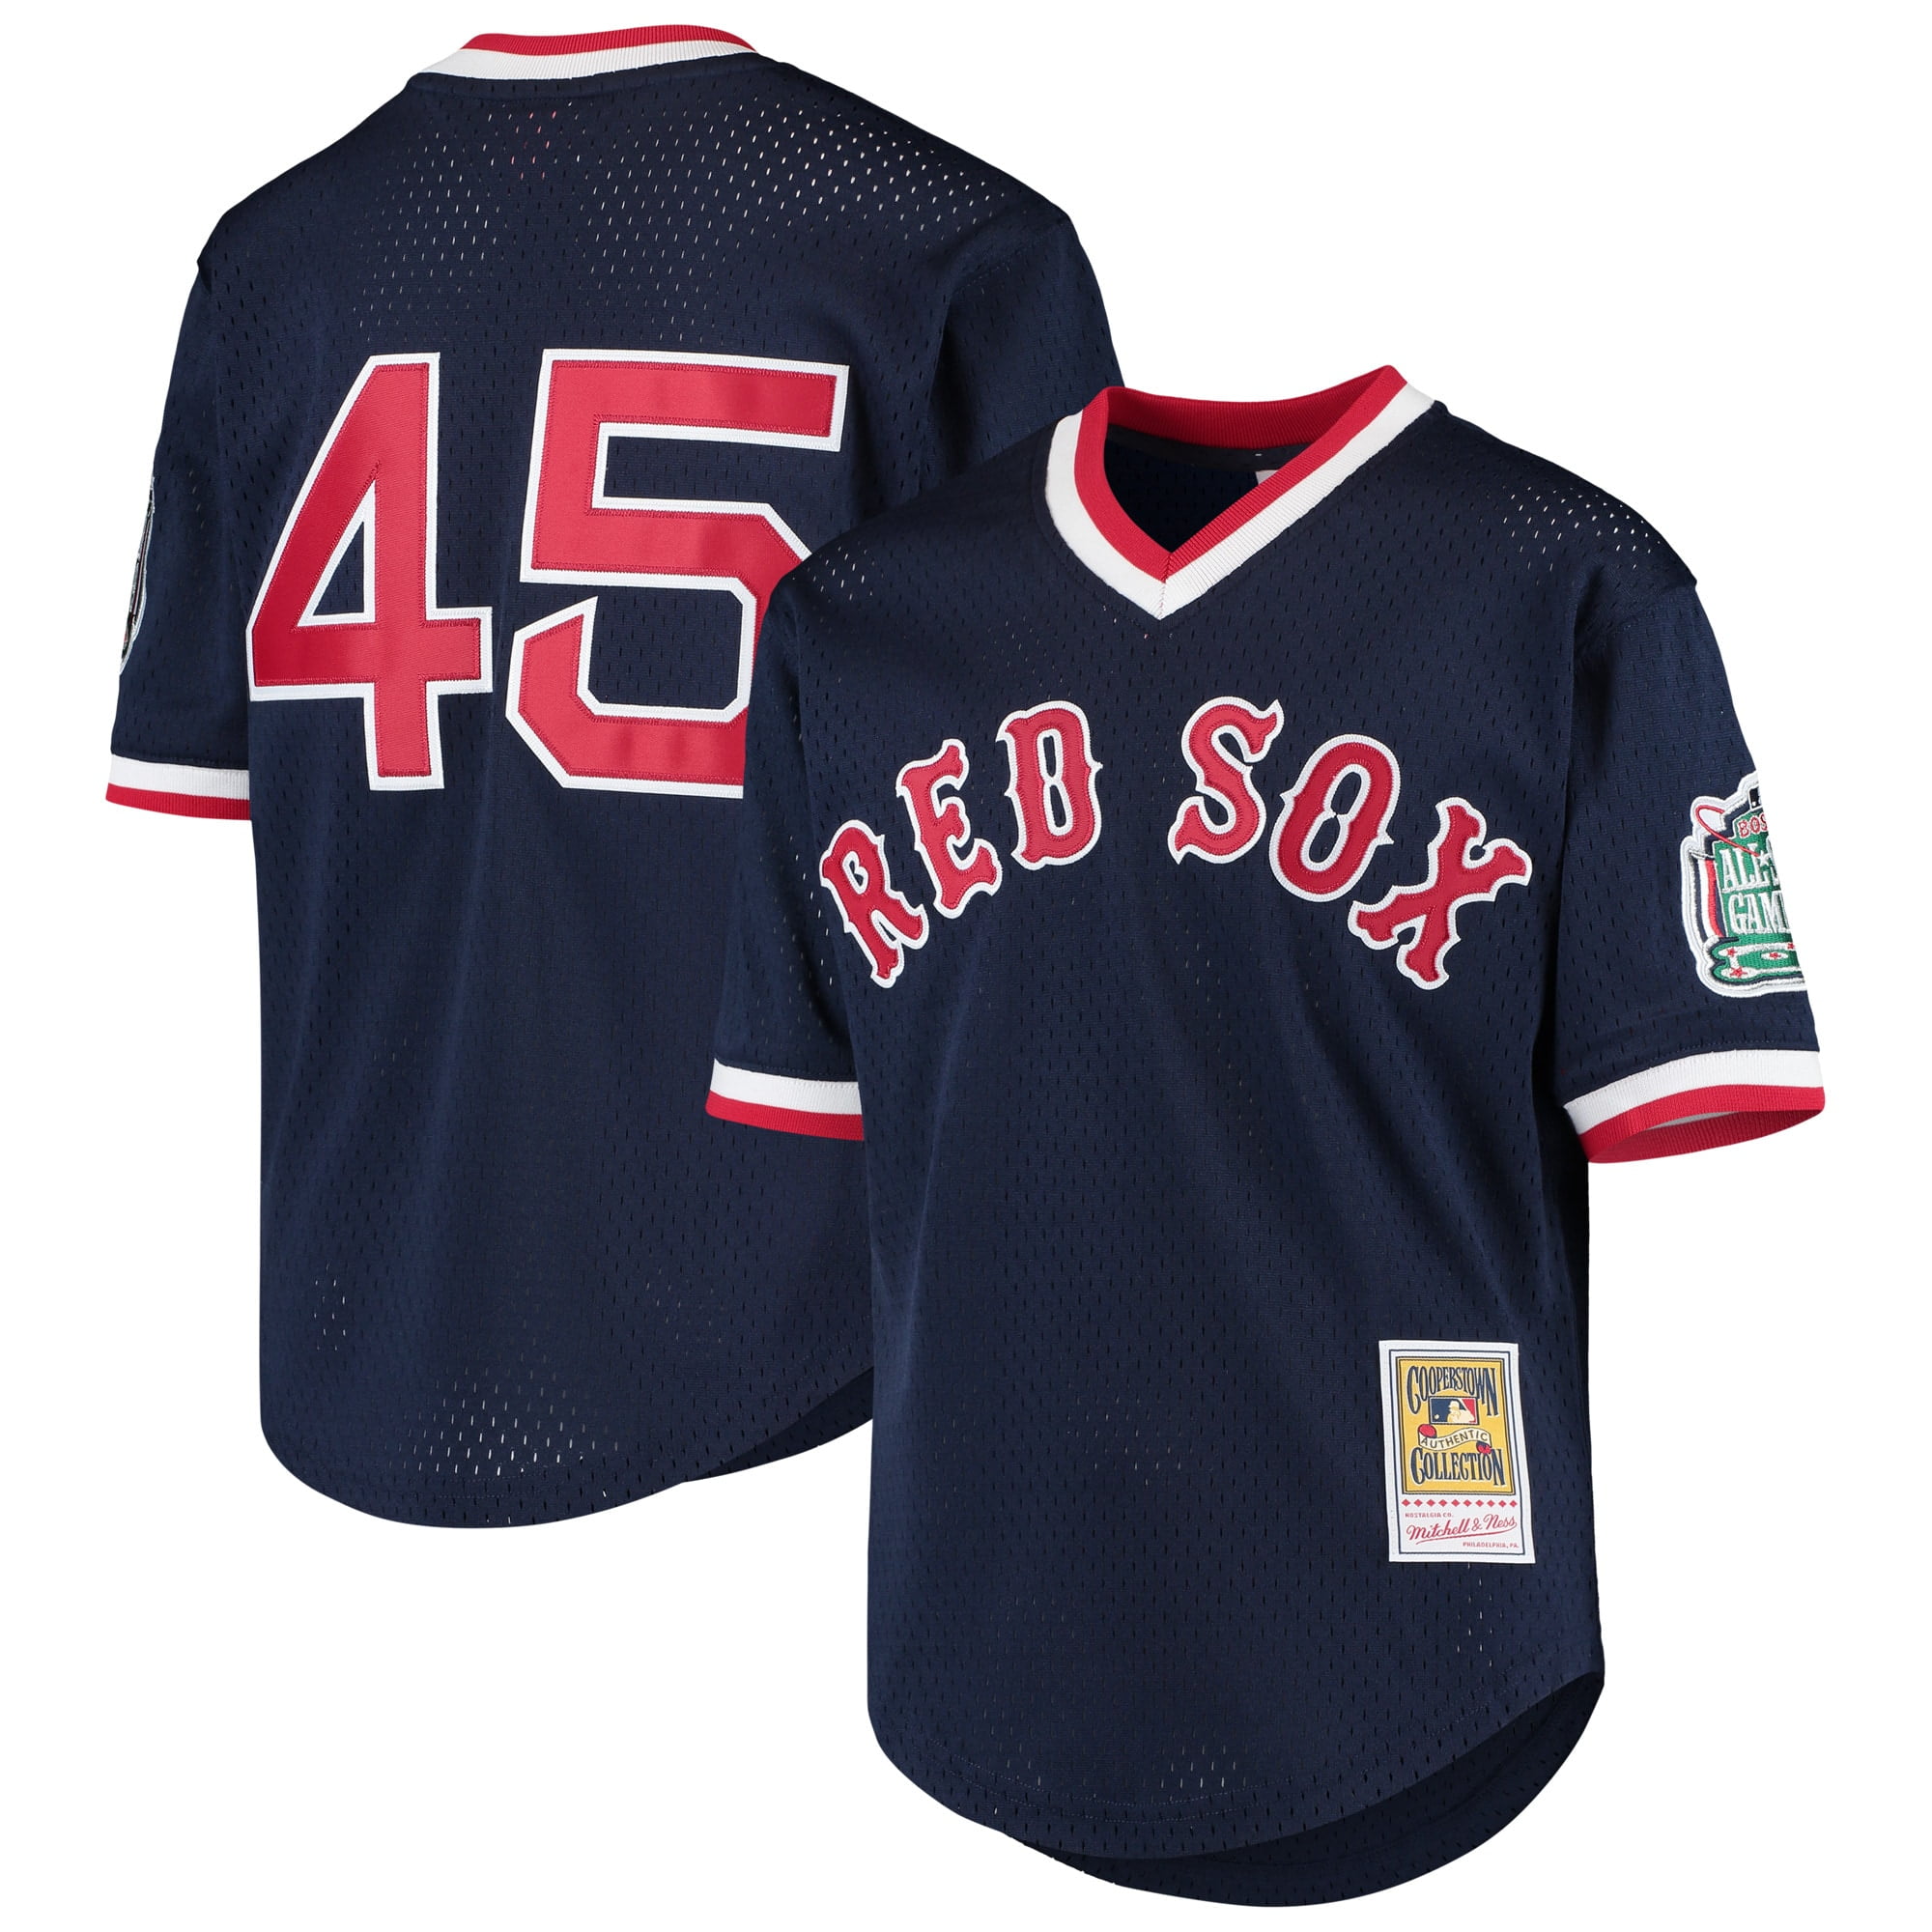 red sox practice jersey